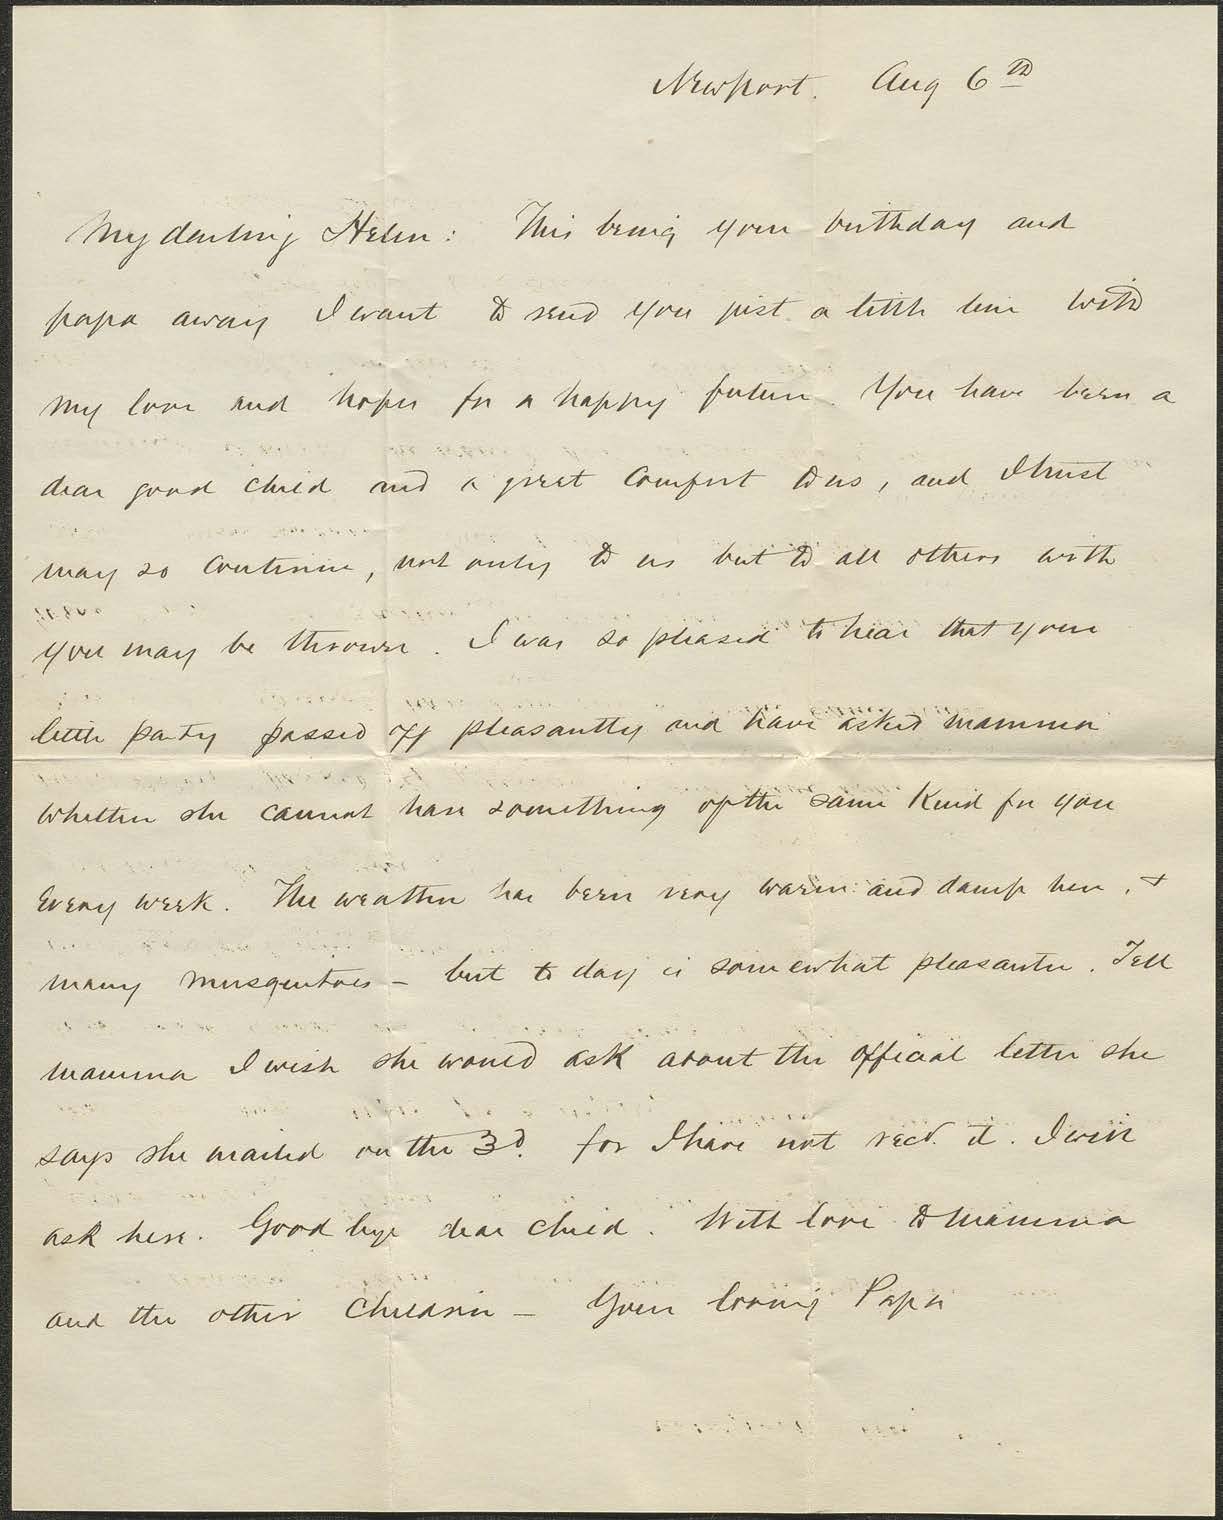 Letter to Helen E. Mahan from Alfred T. Mahan [1889] Aug 6